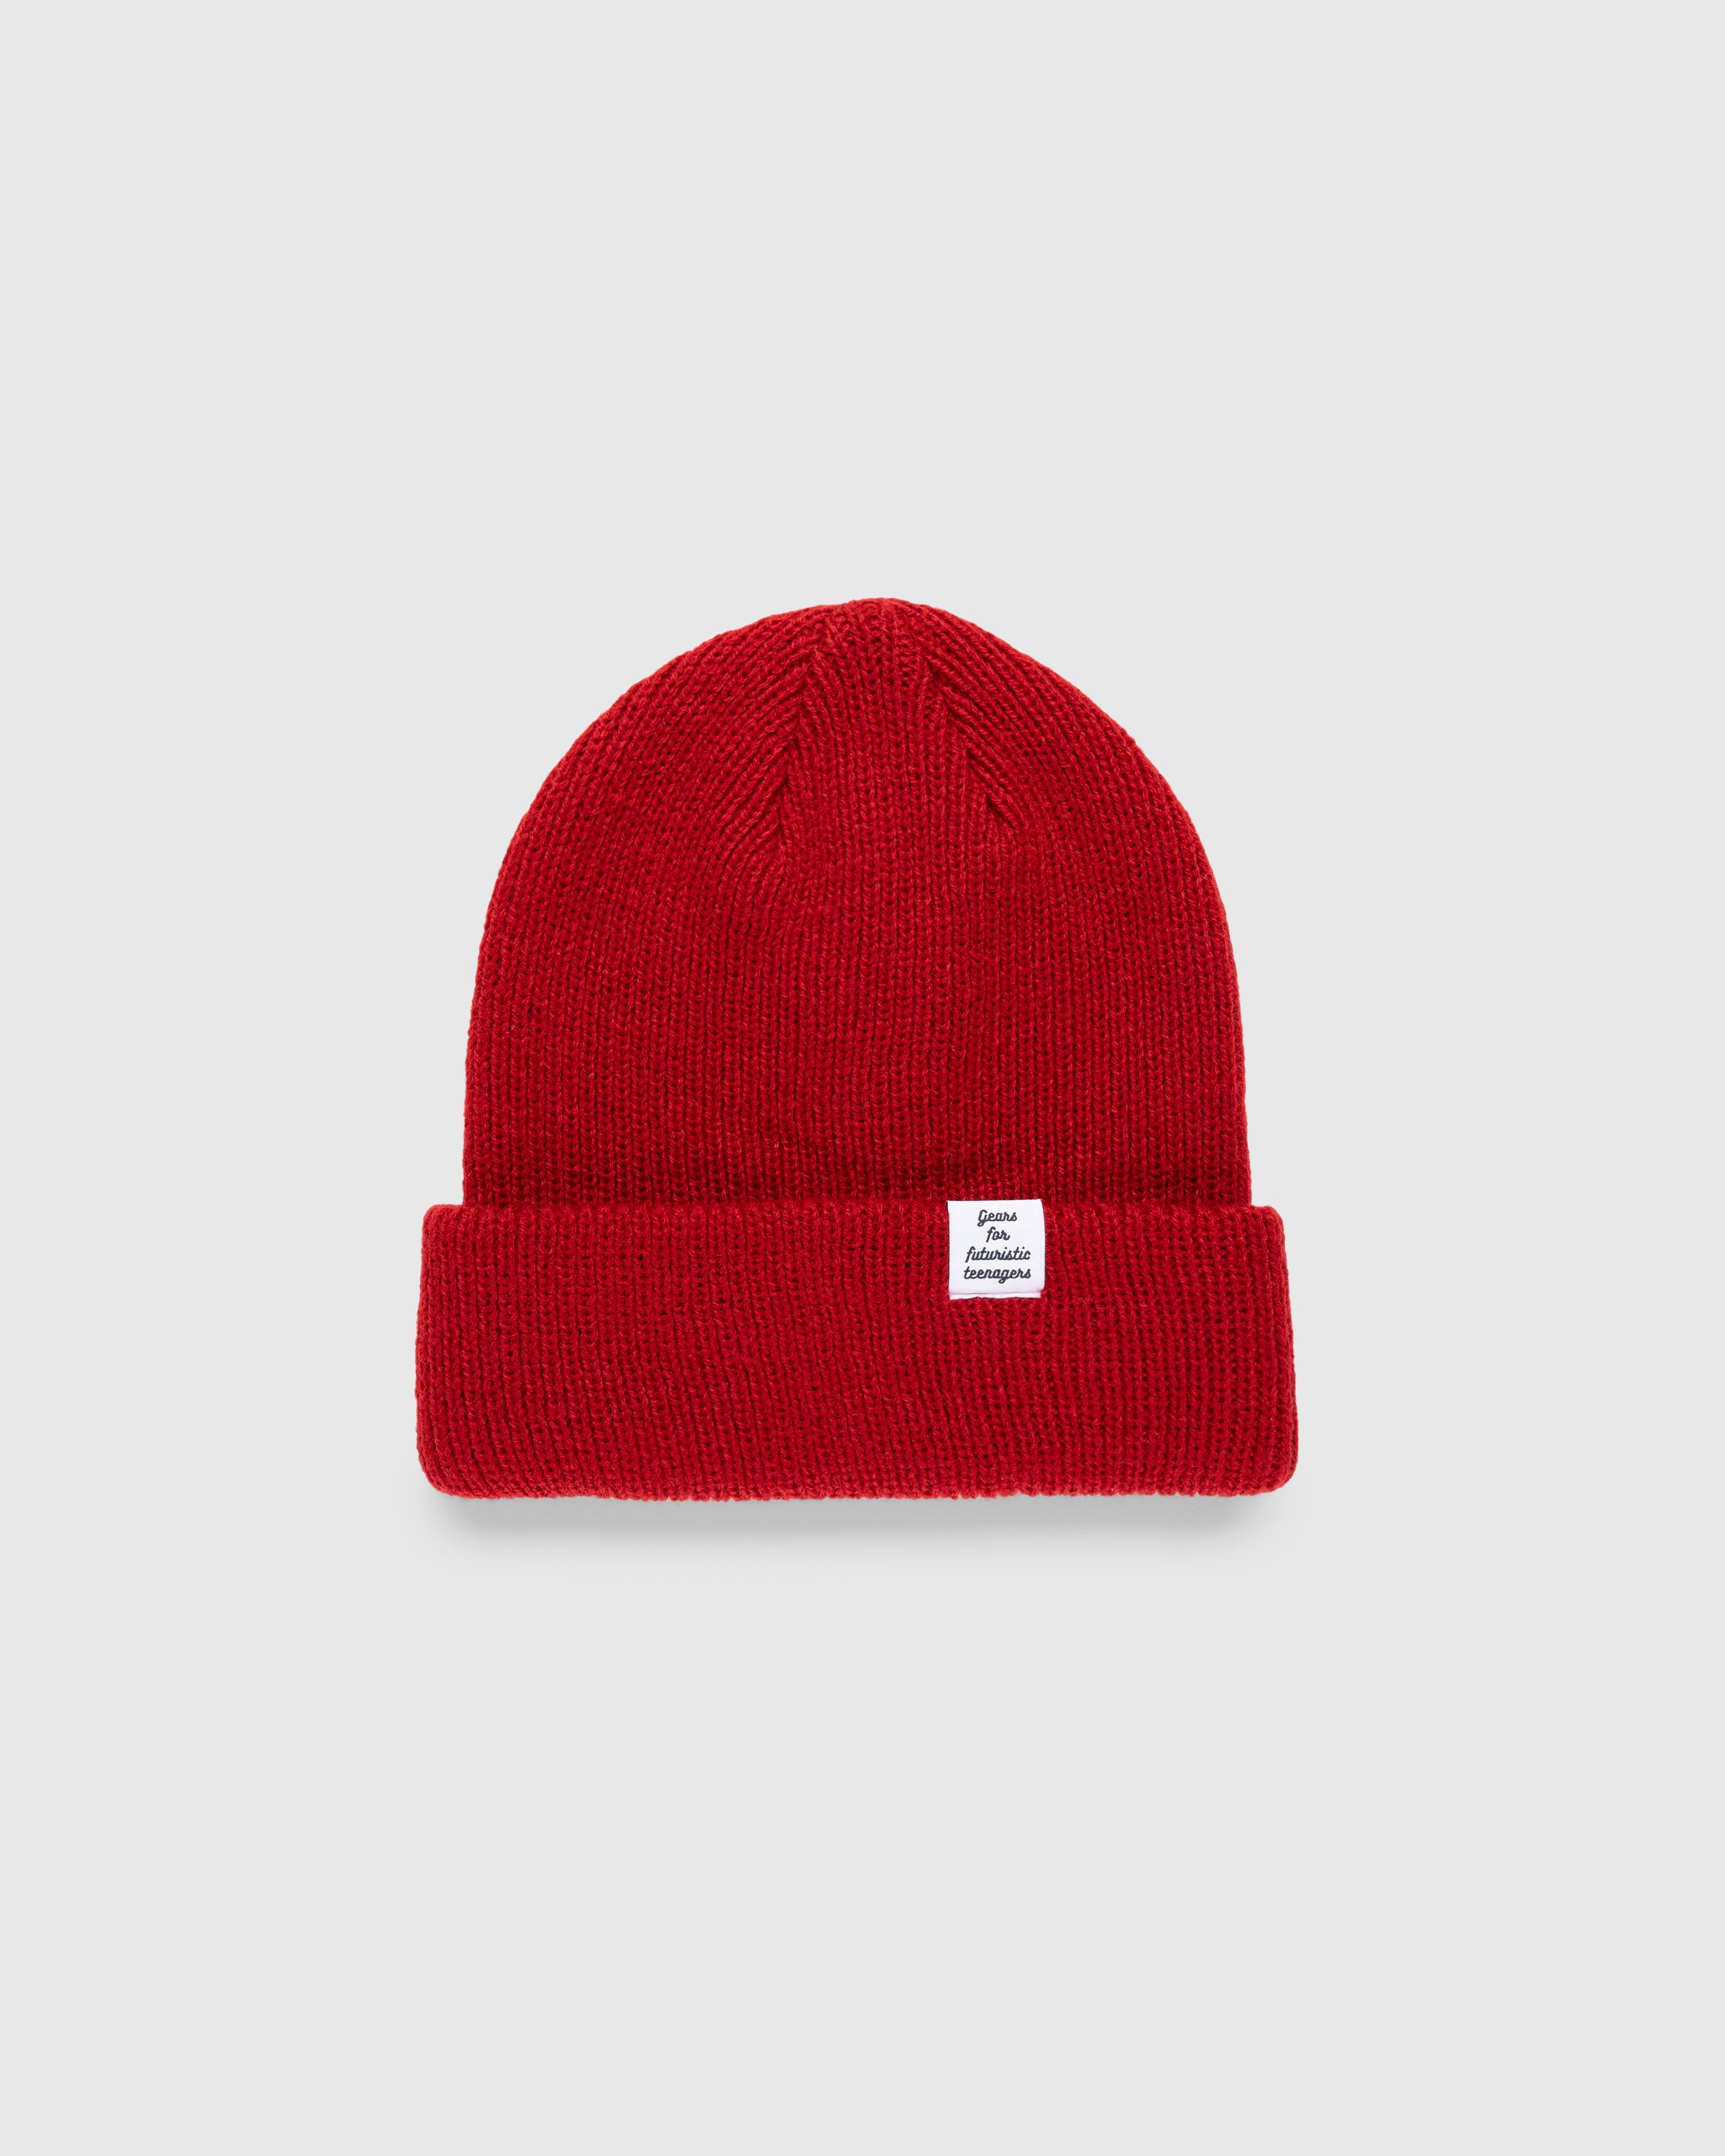 Human Made - Classic Beanie Red - Accessories - Red - Image 1